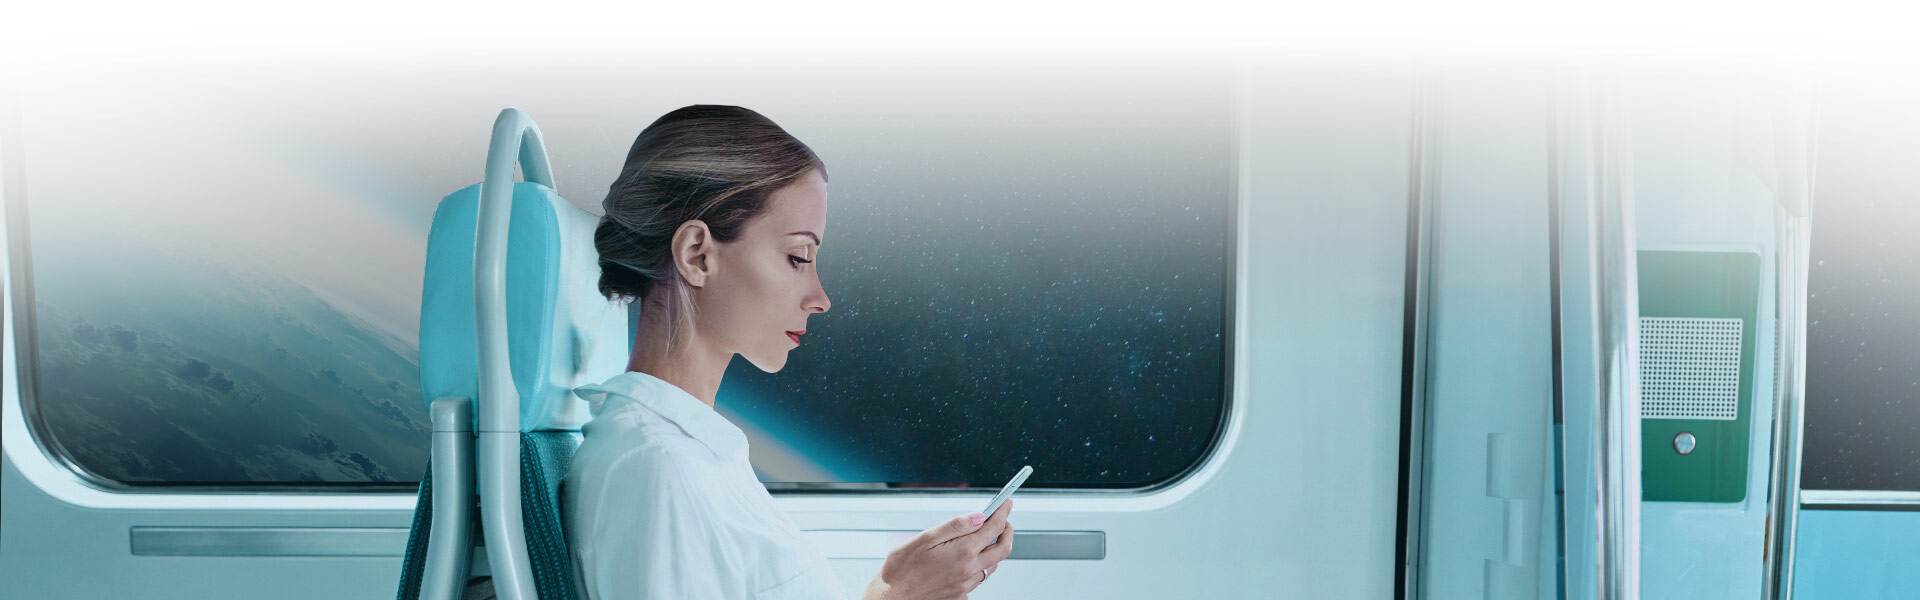 Zyxel Nebula intro image - woman sitting on the monorail from the main image on her mobile phone